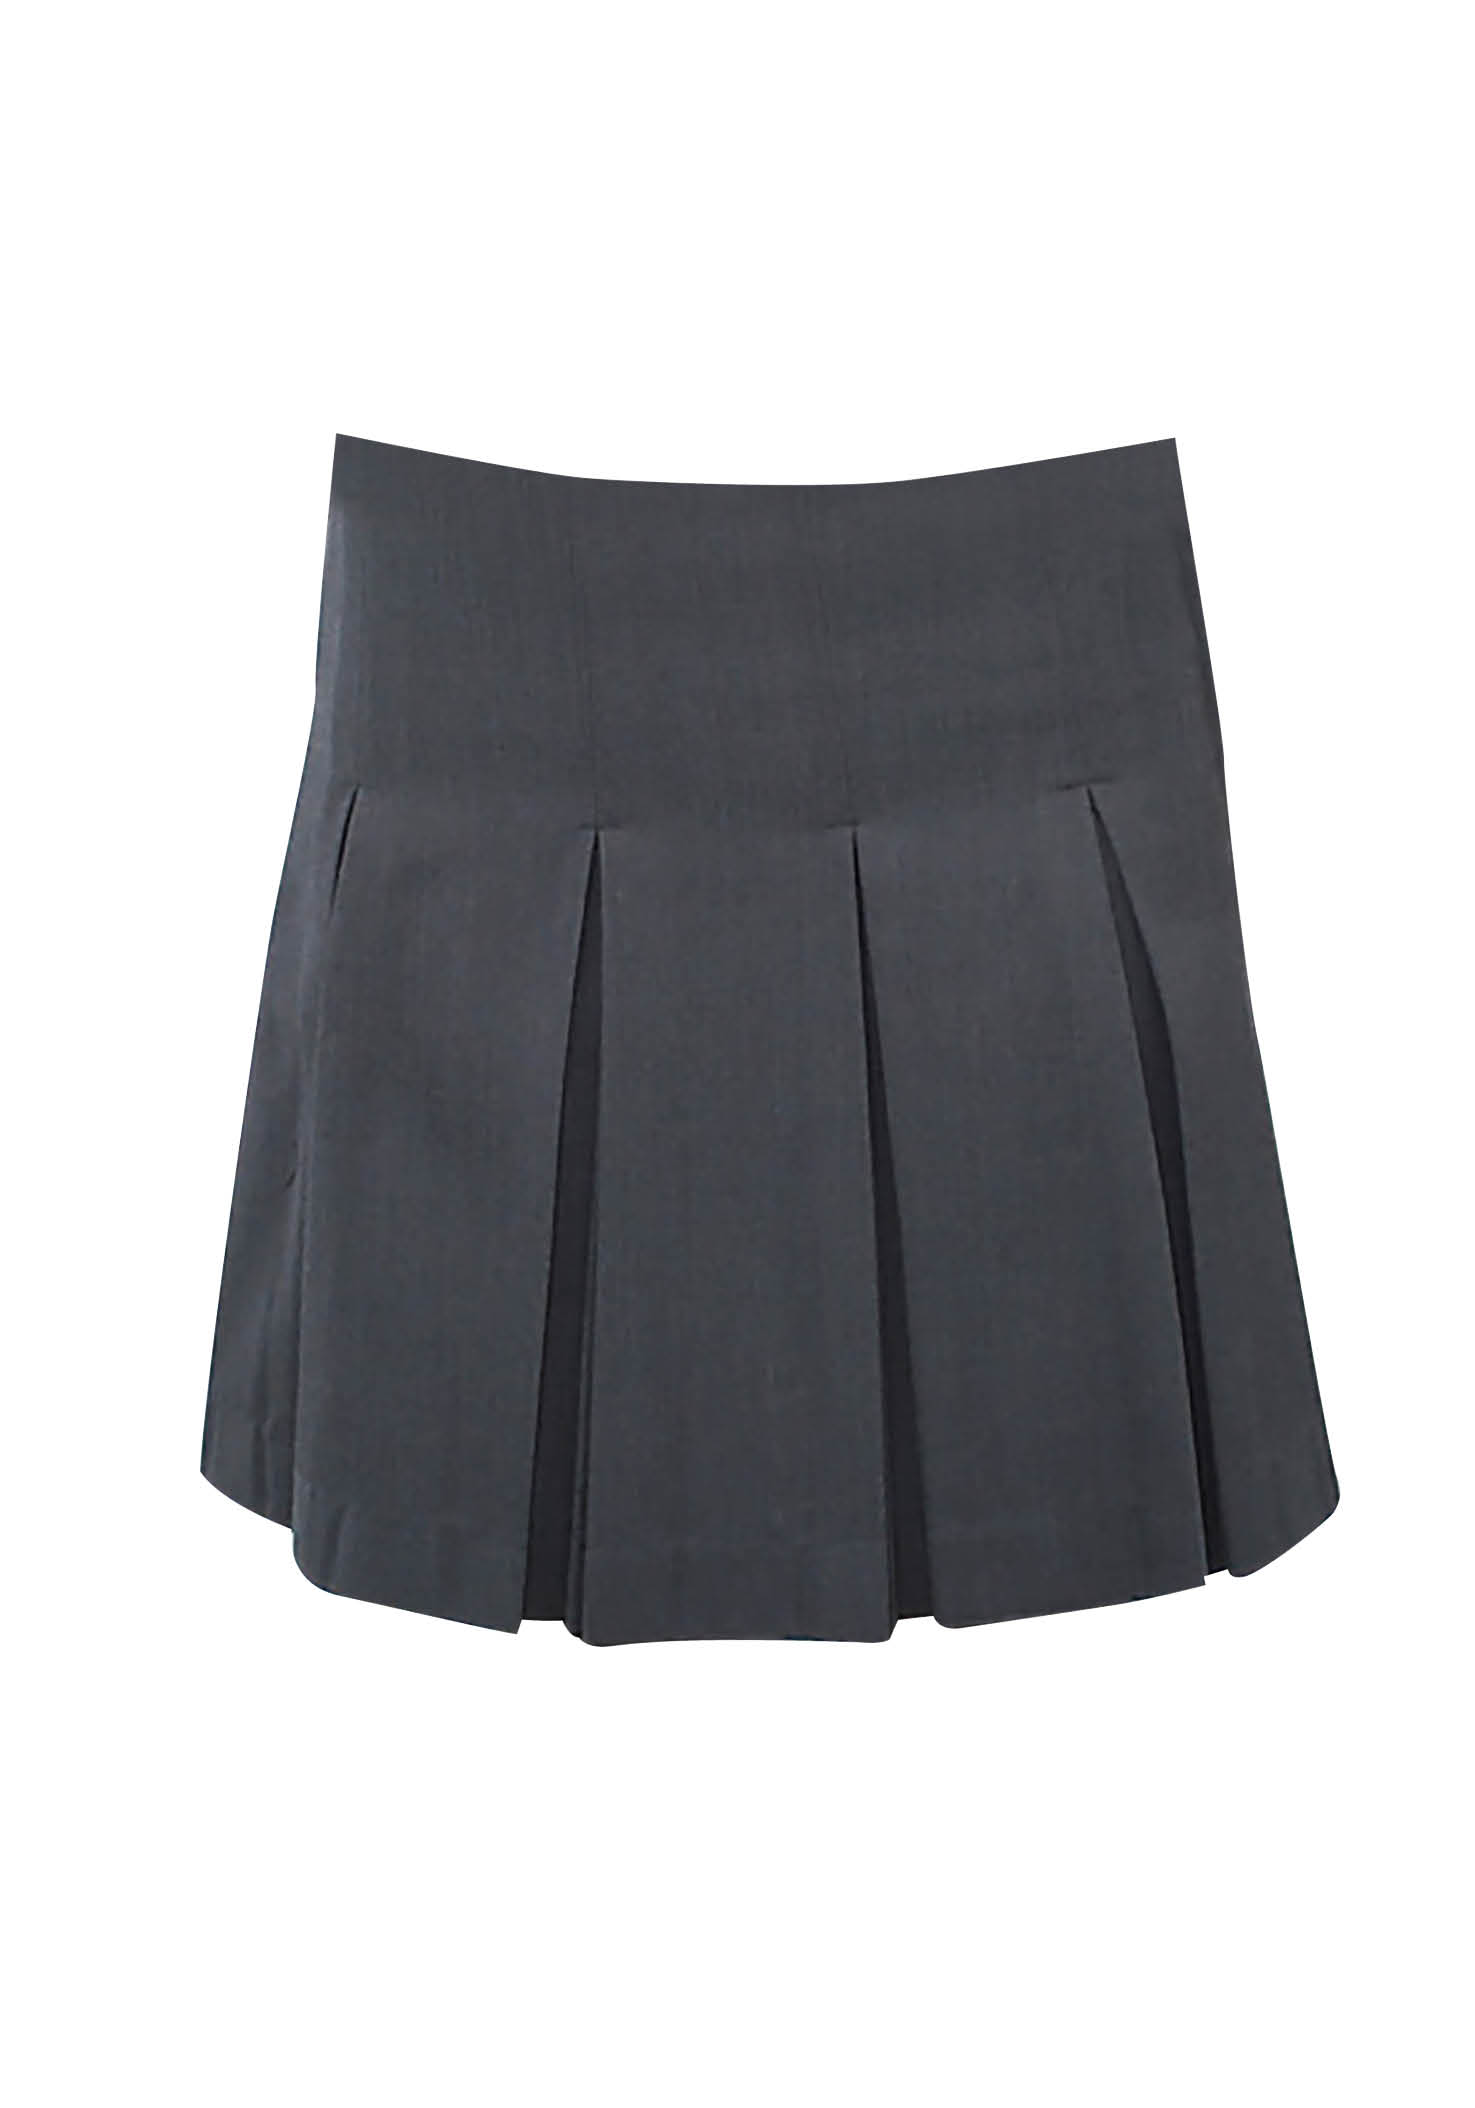 Conservatorium Girls Grey Pleated Skirt | Shop at Pickles Schoolwear ...